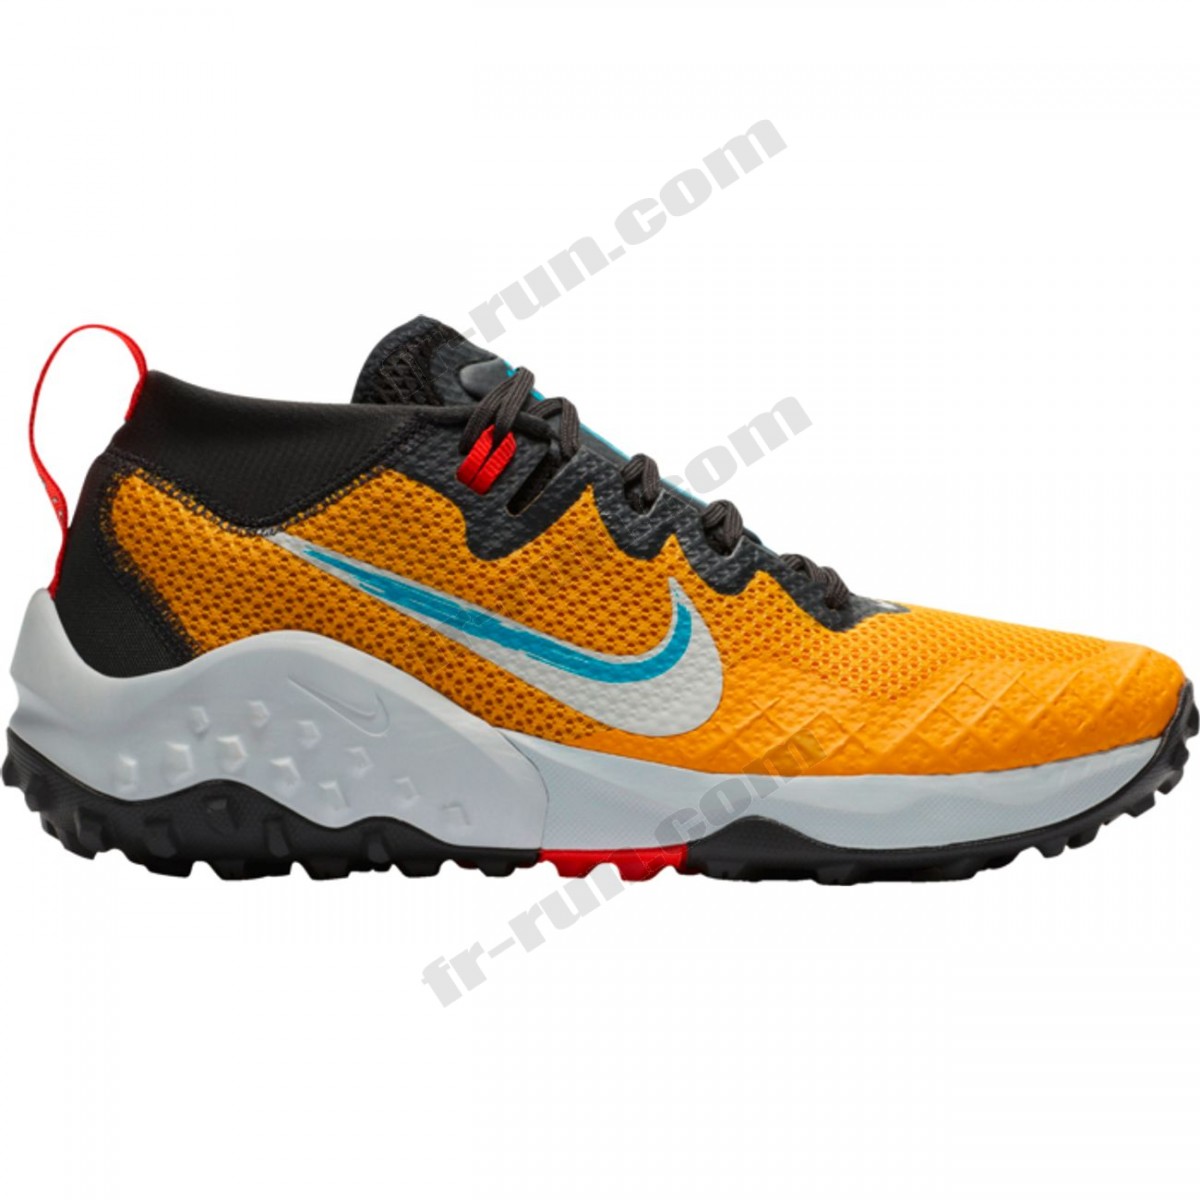 Nike/CHAUSSURES BASSES running homme NIKE NIKE WILDHORSE 7 ◇◇◇ Pas Cher Du Tout - Nike/CHAUSSURES BASSES running homme NIKE NIKE WILDHORSE 7 ◇◇◇ Pas Cher Du Tout